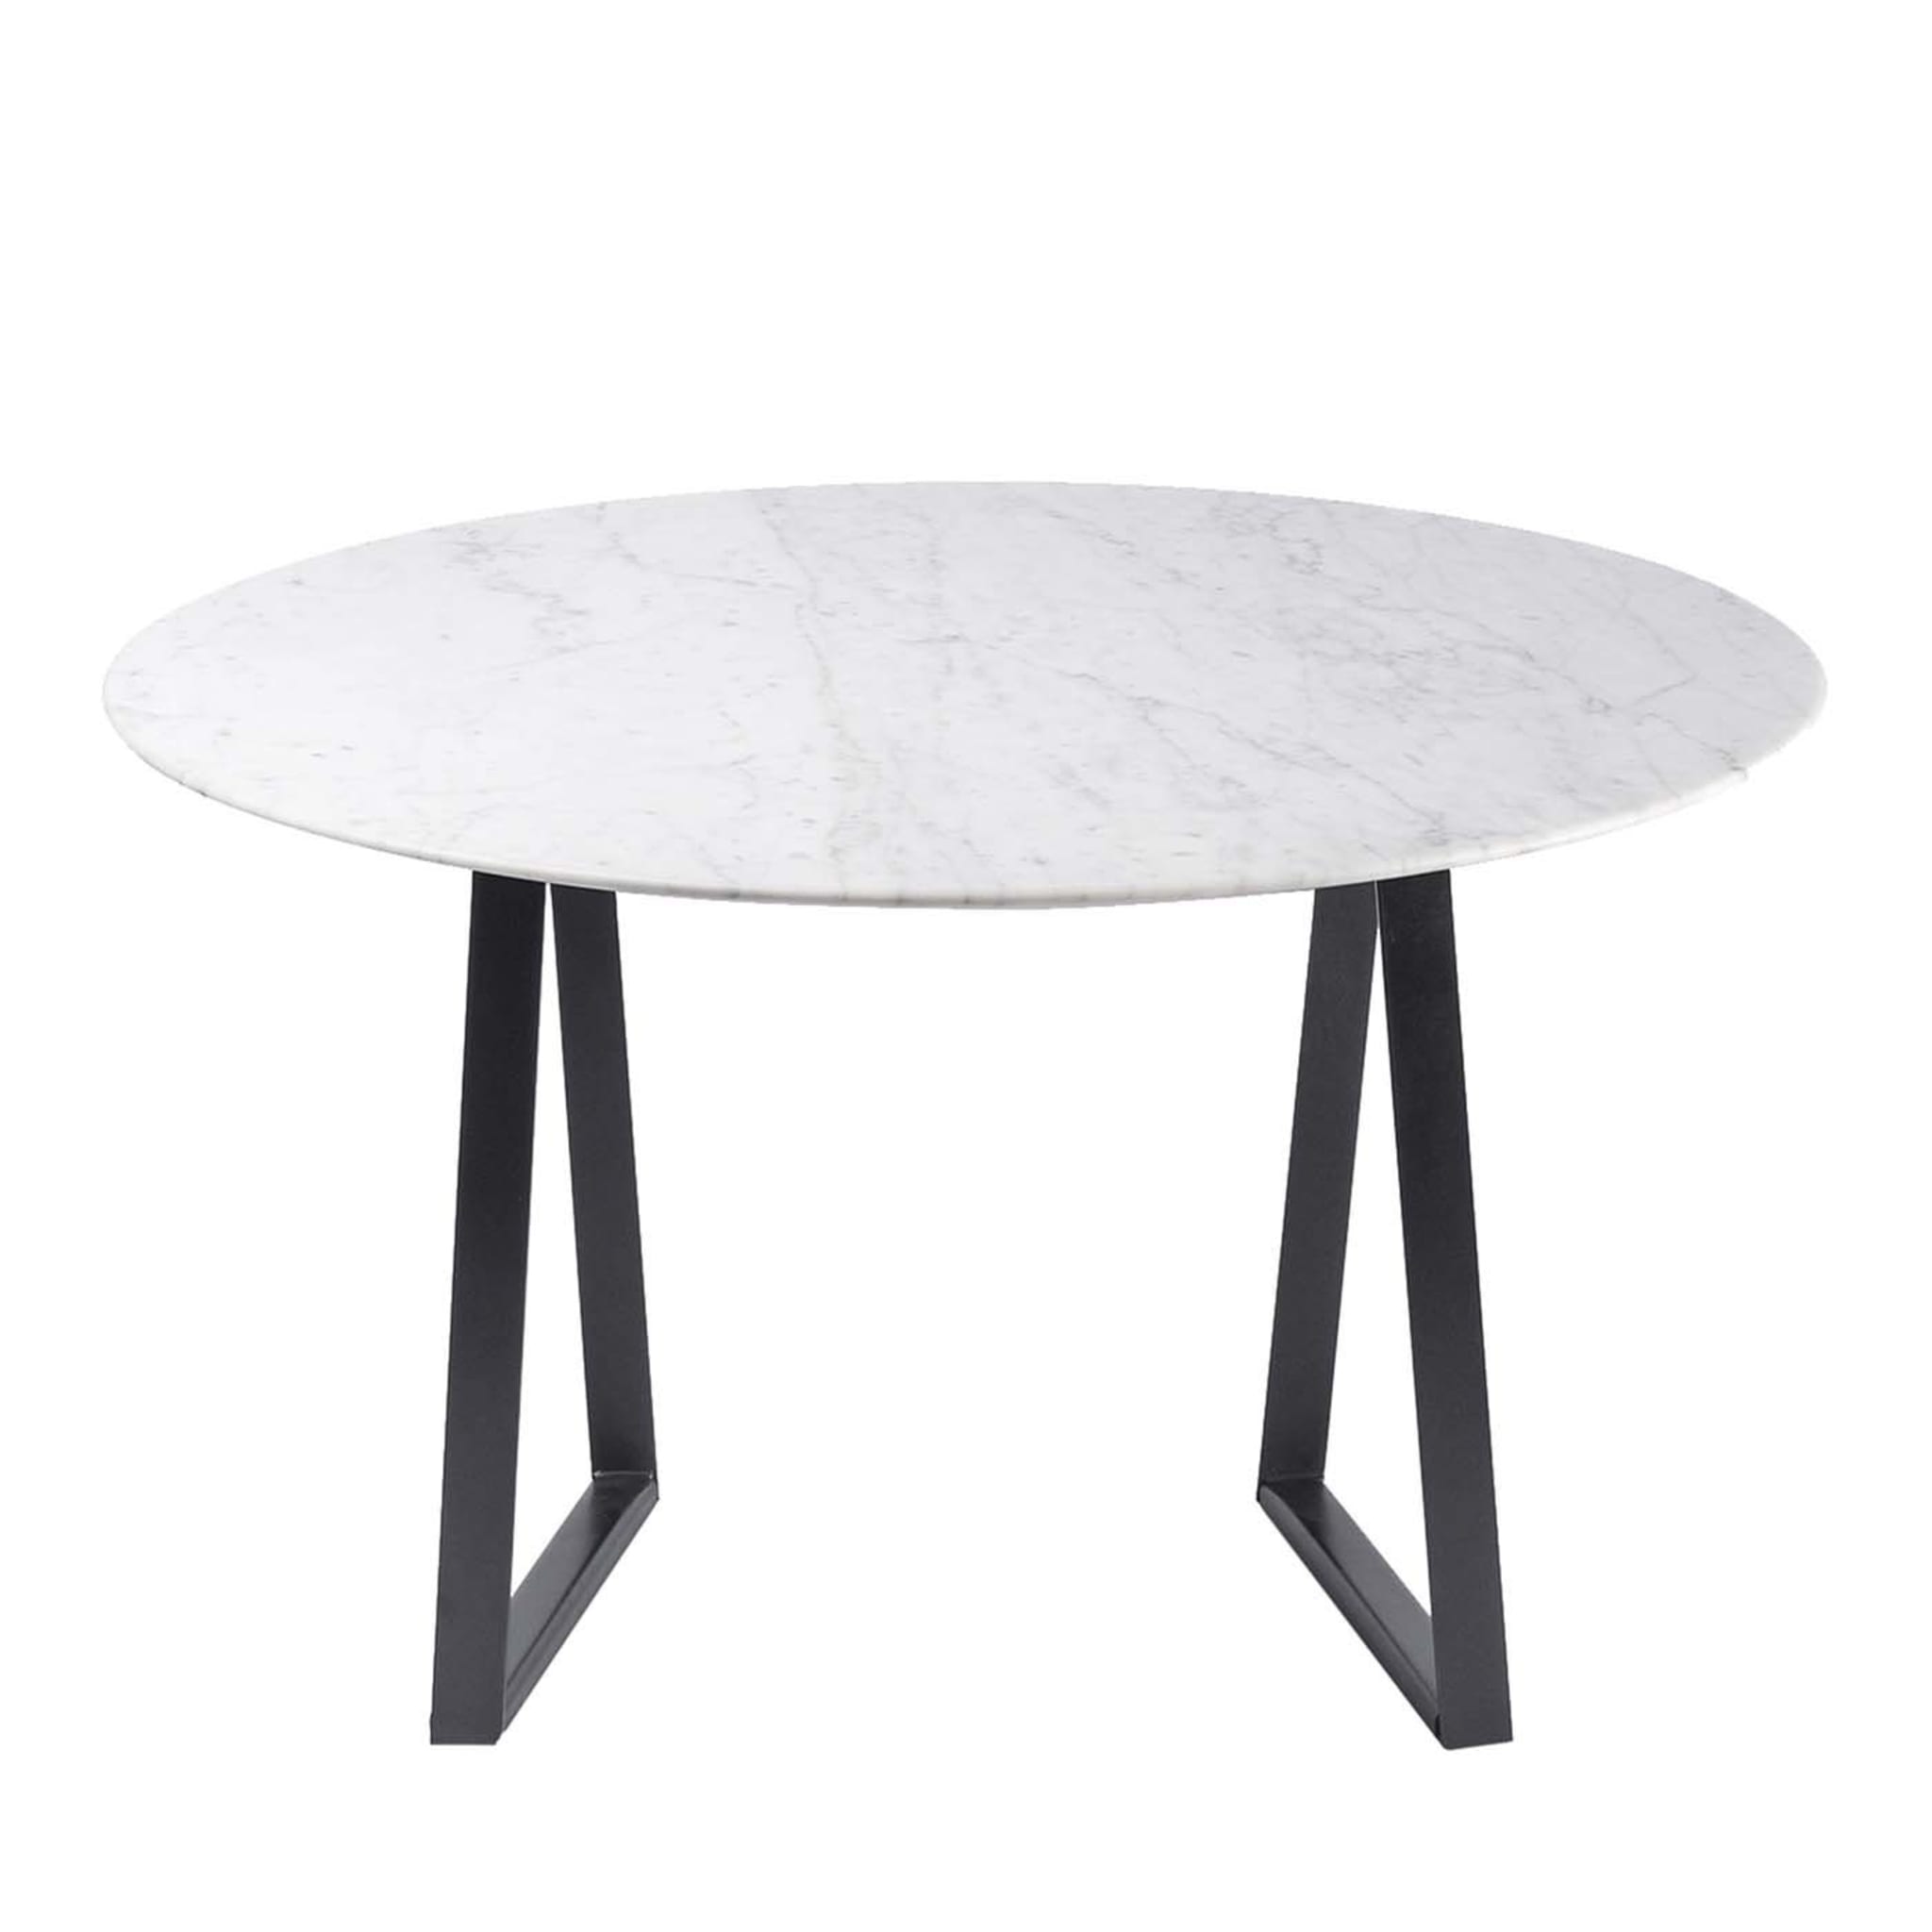 Dritto Round Coffee Table by Piero Lissoni - Main view